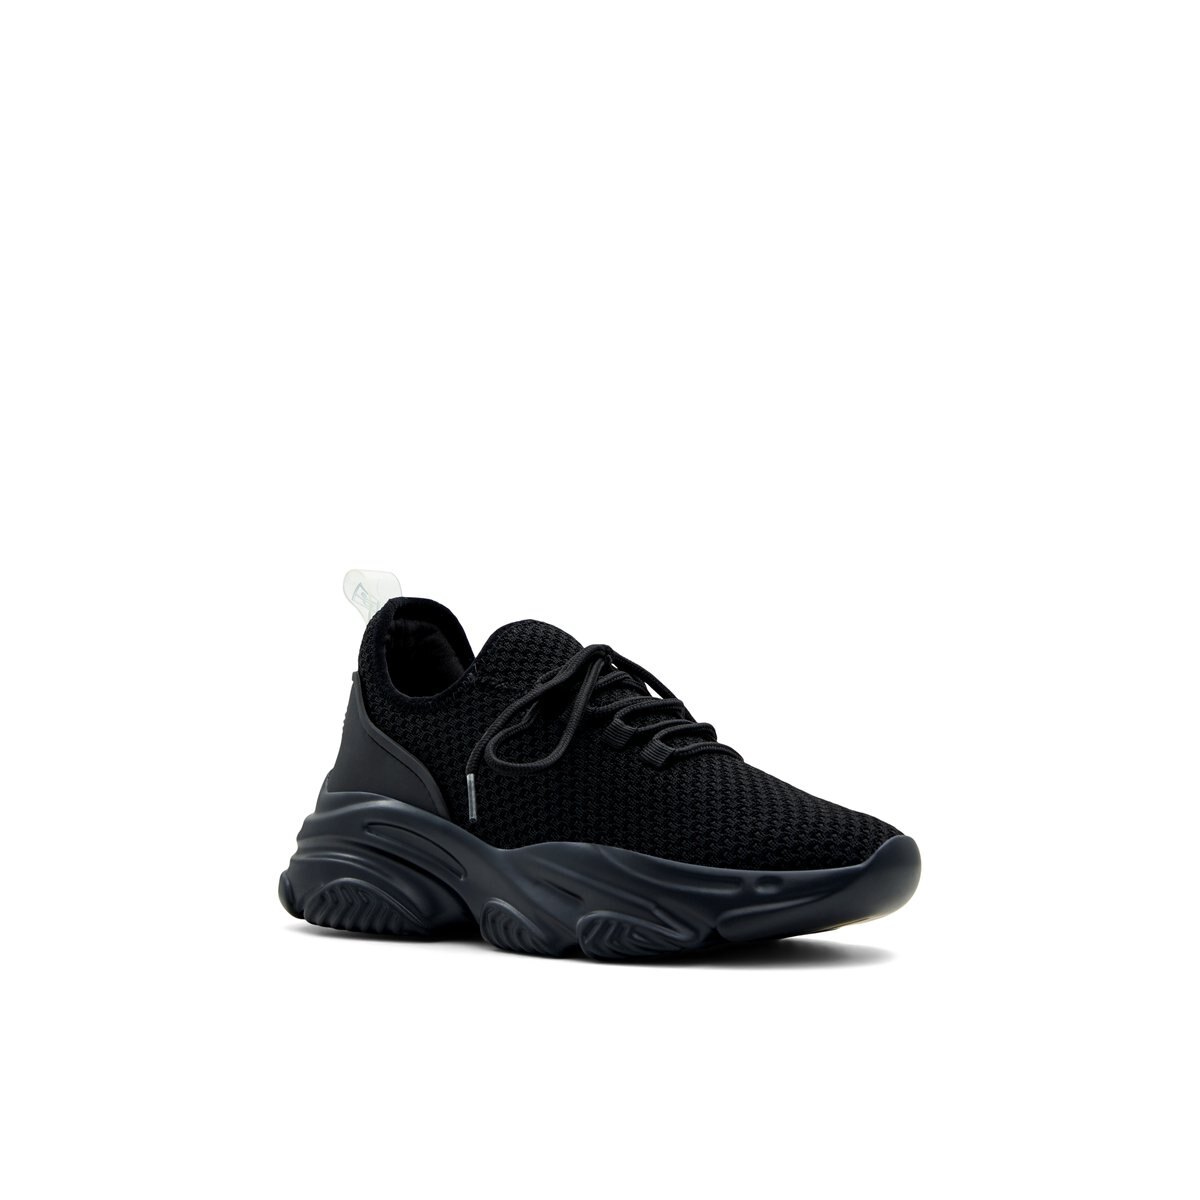 Trixi Black Women's Athleisure Shoes | Call It Spring Canada